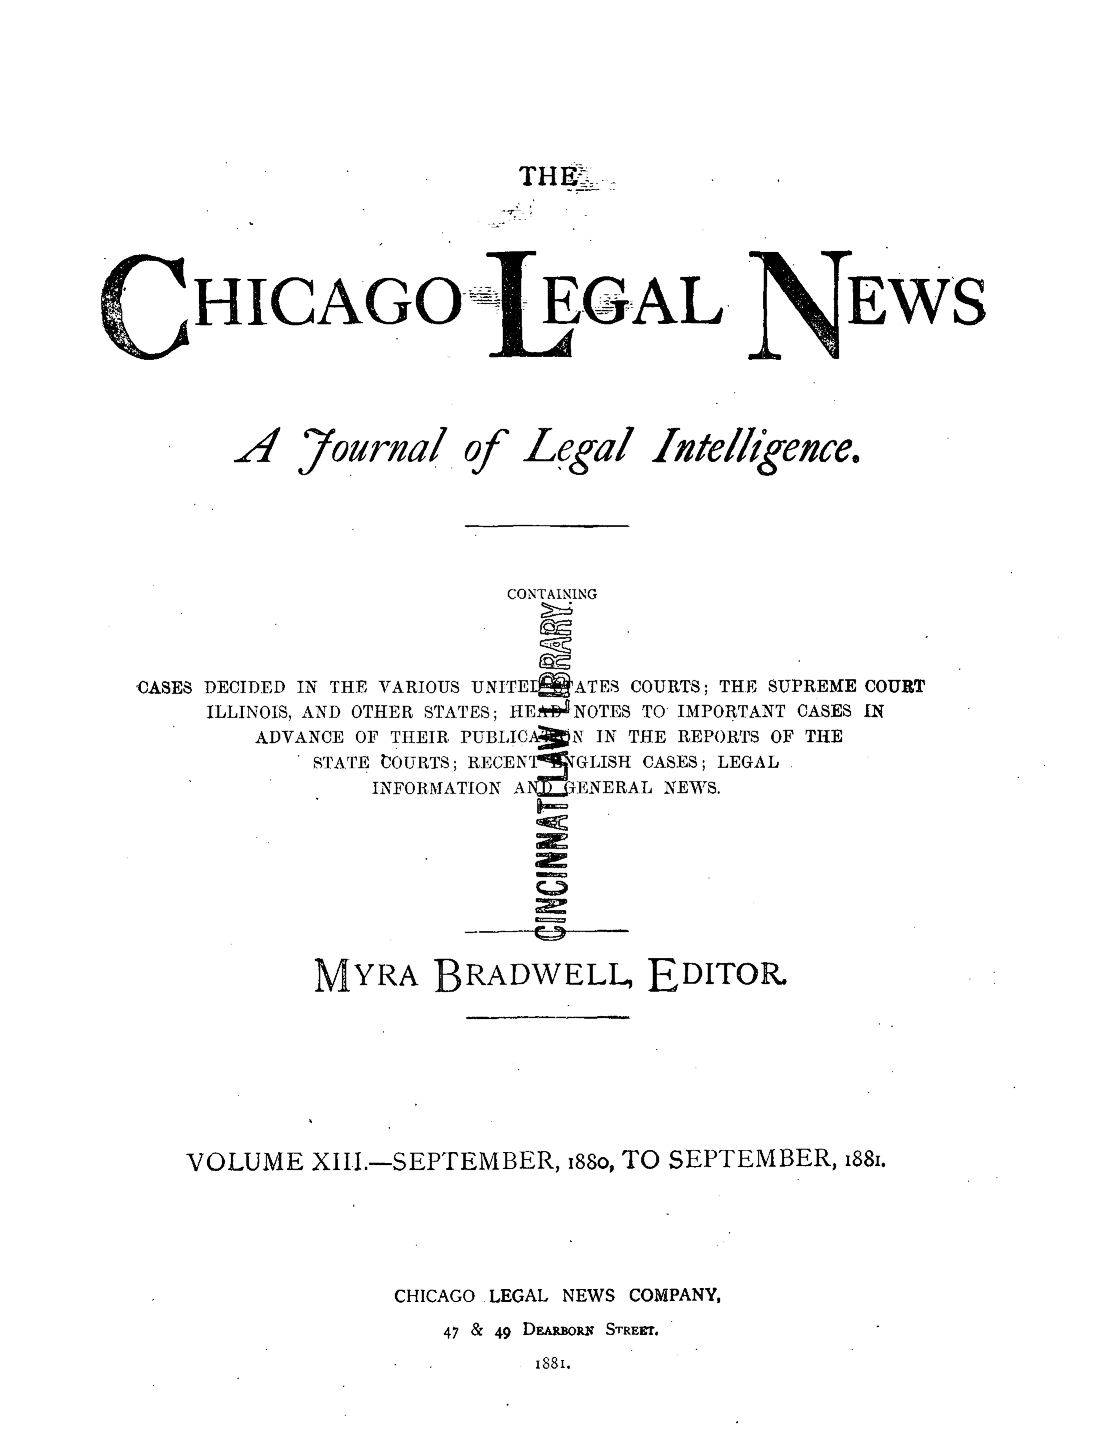 handle is hein.journals/chiclene13 and id is 1 raw text is: T_.HICAGOA ,7ourna/OfEGALLegal Lute,EWS%ikence.CONTAININGCASES DECIDED IN THE VARIOUS UNITE  ATES COURTS; THE SUPREME COURTILLINOIS, AND OTHER STATES; HEll'NOTES TO IMPORTANT CASES INADVANCE OF THEIR PUBLICAXN IN THE REPORTS OF THESTATE  OGURTS; RECENrTIGLISH CASES; LEGALINFORMATION AN=11ENERAL NEWS.rMYRA BRADWELL, EDITORVOLUME XIII.-SEPTEMBER, i88o, TO SEPTEMBER, 88.CHICAGO -LEGAL NEWS COMPANY,47 & 49 DEARouis STREET.1881.